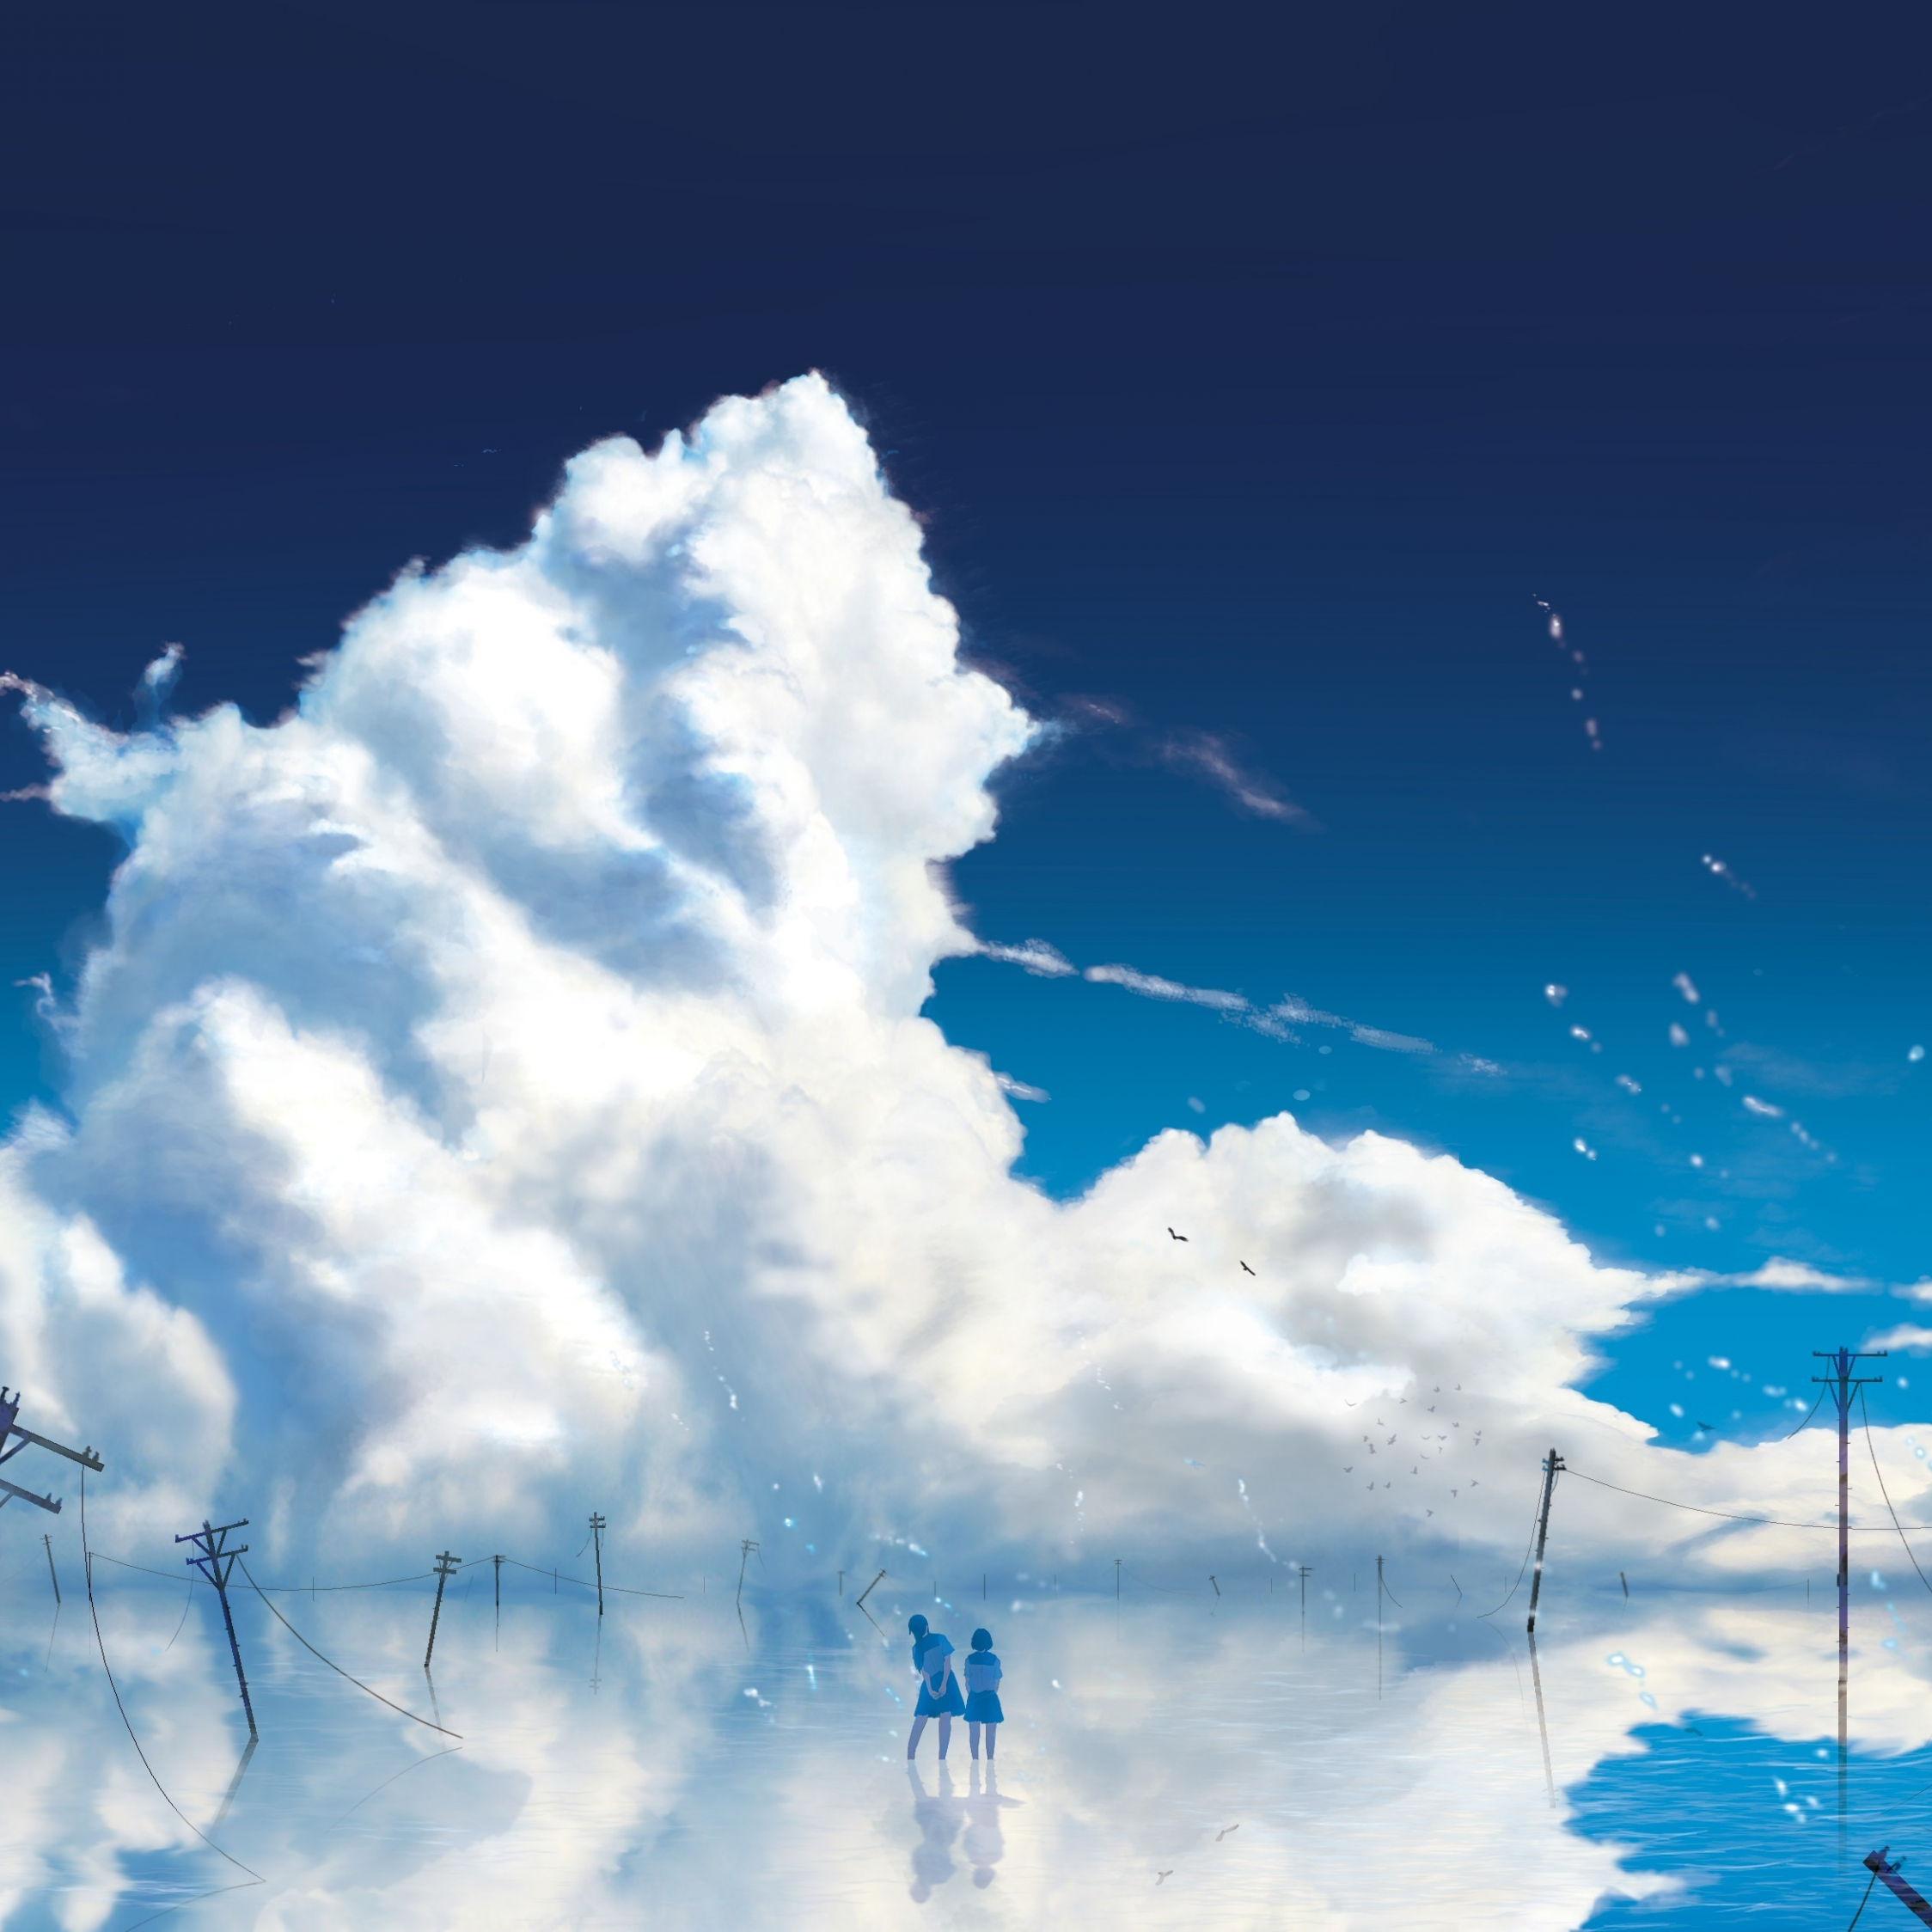 Download Wallpaper 2248x2248 Anime Girls Outdoor Clouds Ipad Air Ipad Air 2 Ipad 3 Ipad 4 Ipad Mini 2 Ipad Mini 3 2248x2248 Hd Background 15